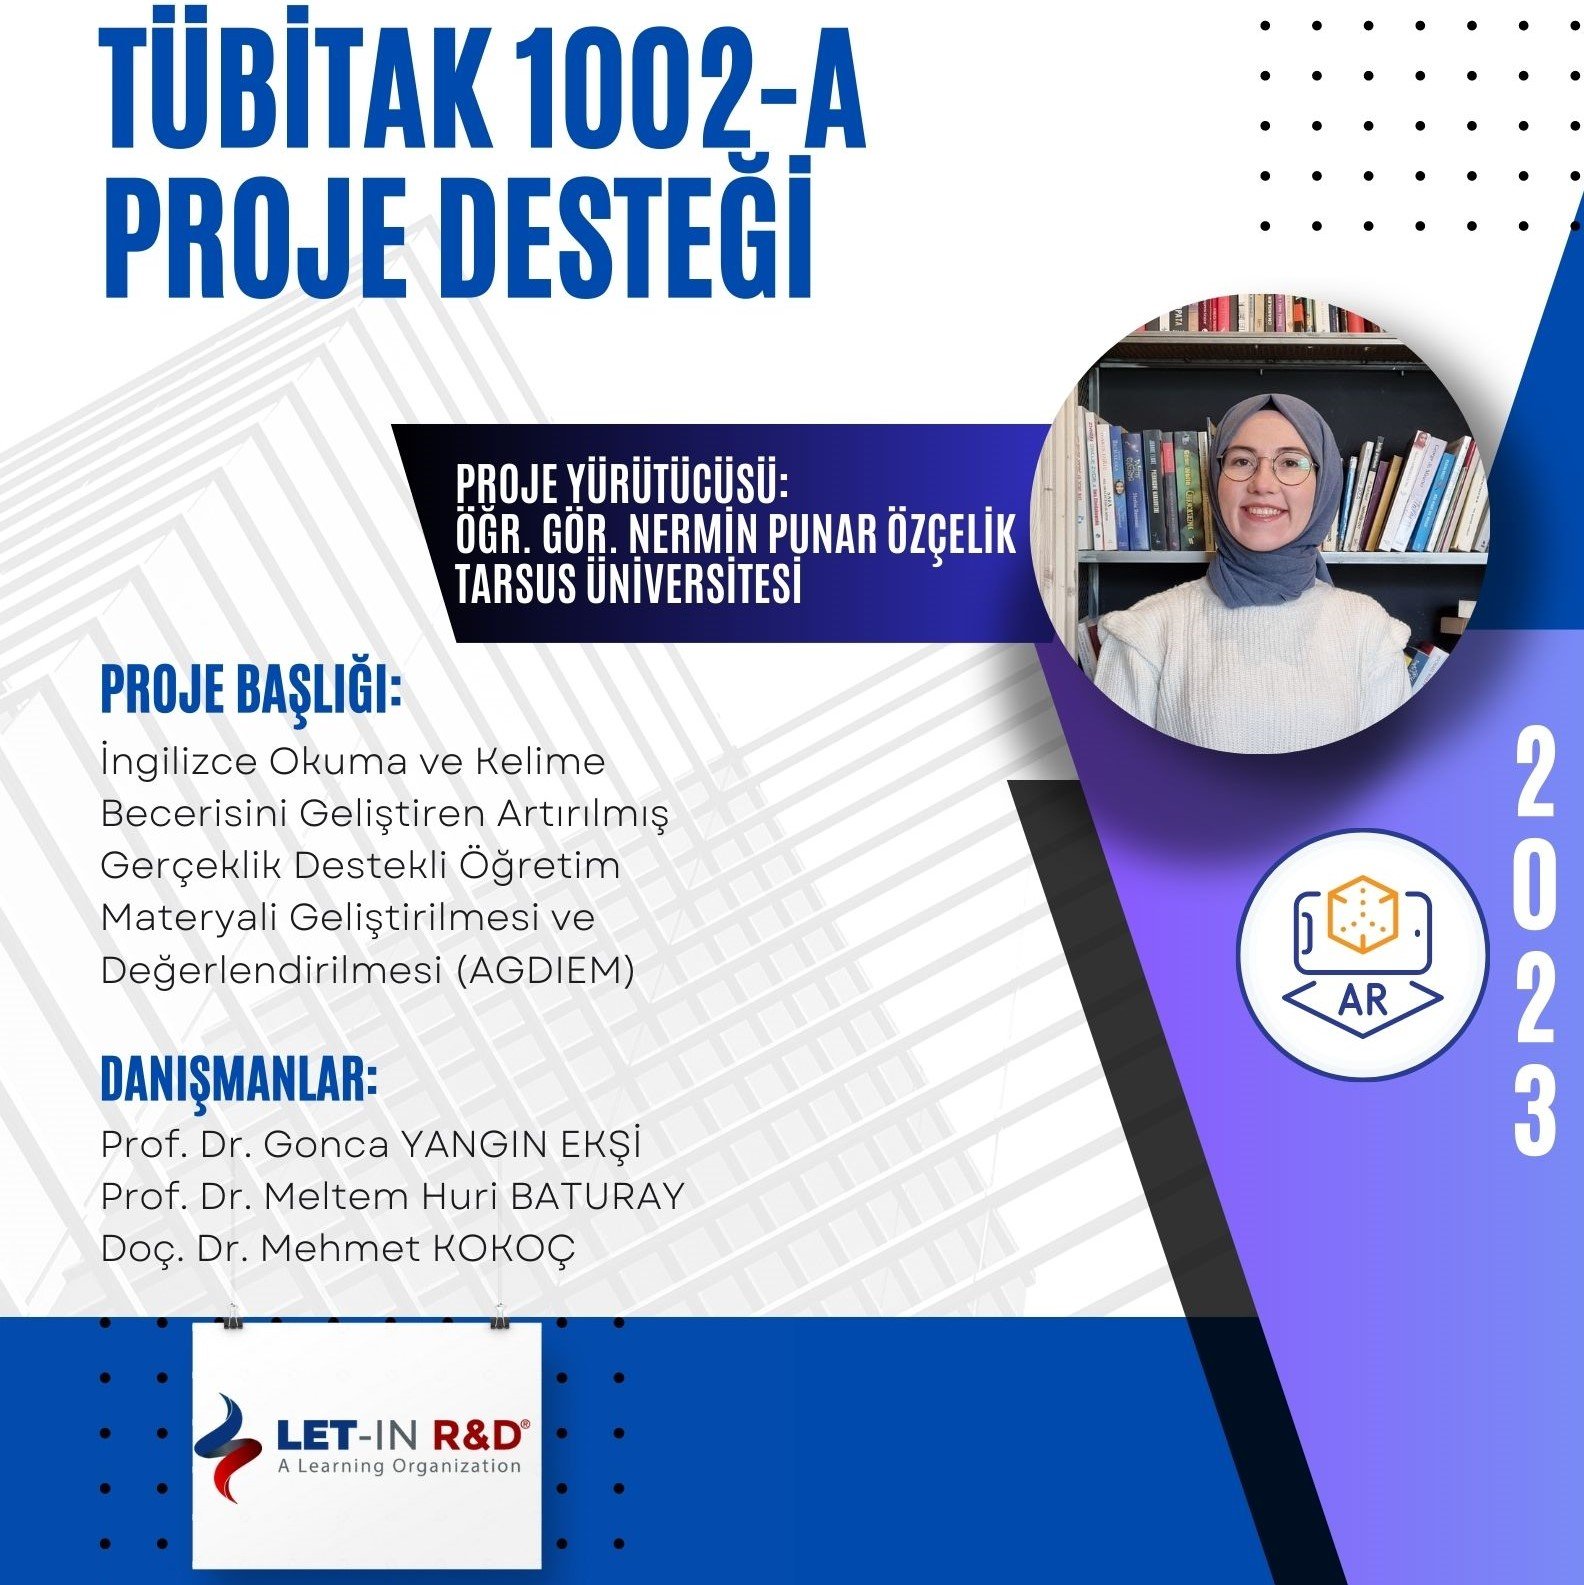 TUBITAK 1002-A Project  Development and Evaluation of an Augmented Reality Enhanced Instructional Material to Develop English Reading Comprehension and Vocabulary Skills